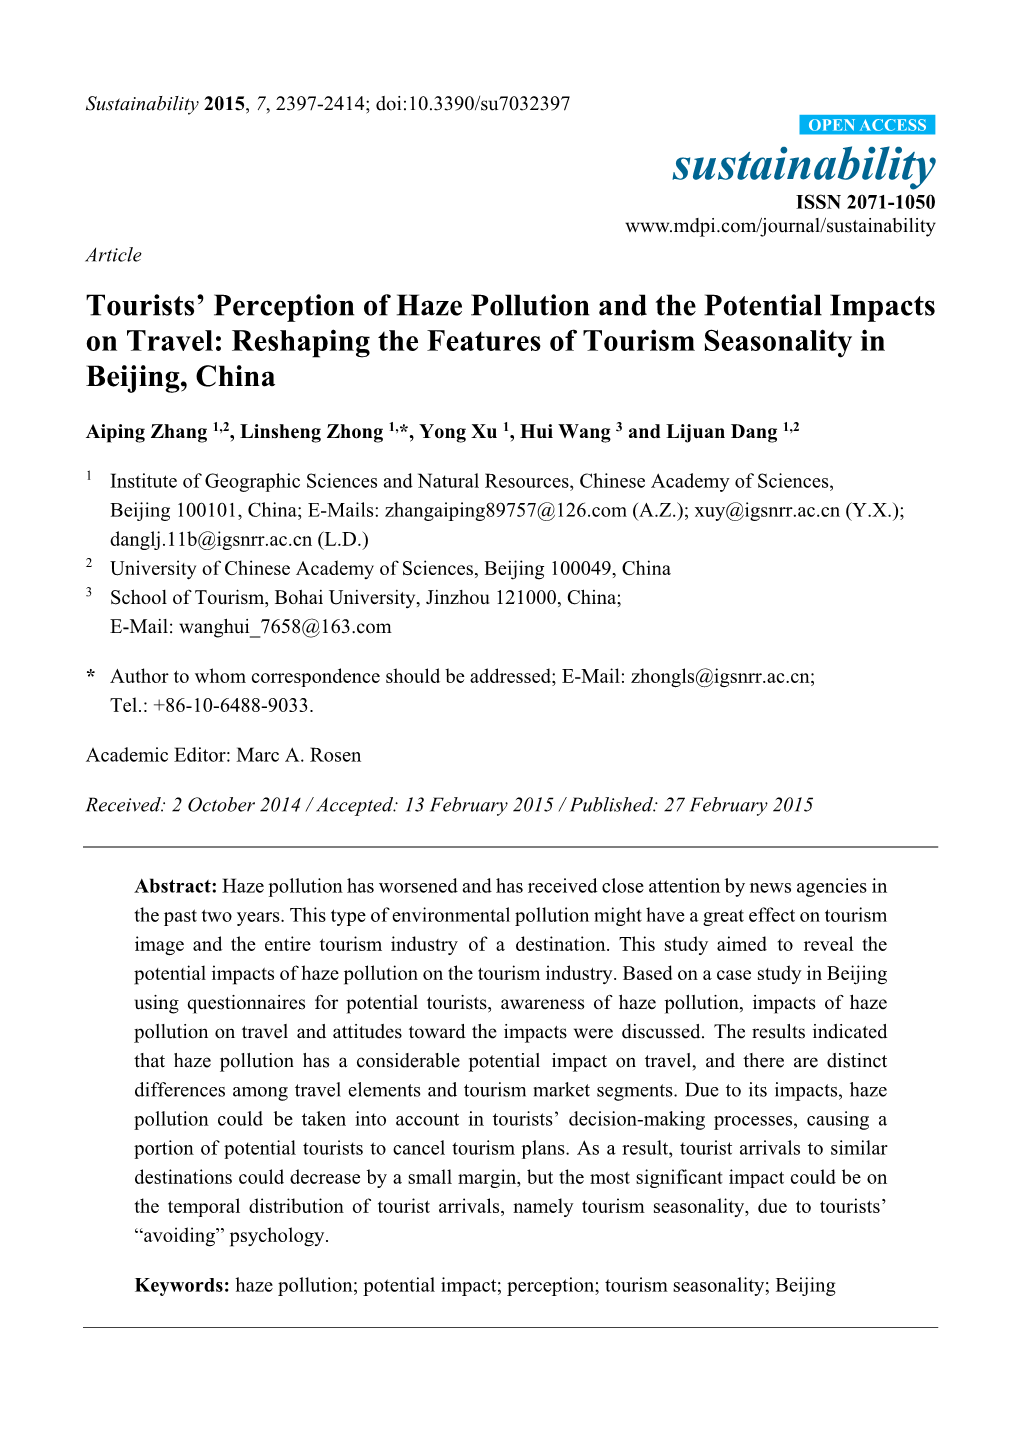 Tourists' Perception of Haze Pollution and the Potential Impacts on Travel: Reshaping the Features of Tourism Seasonality in B